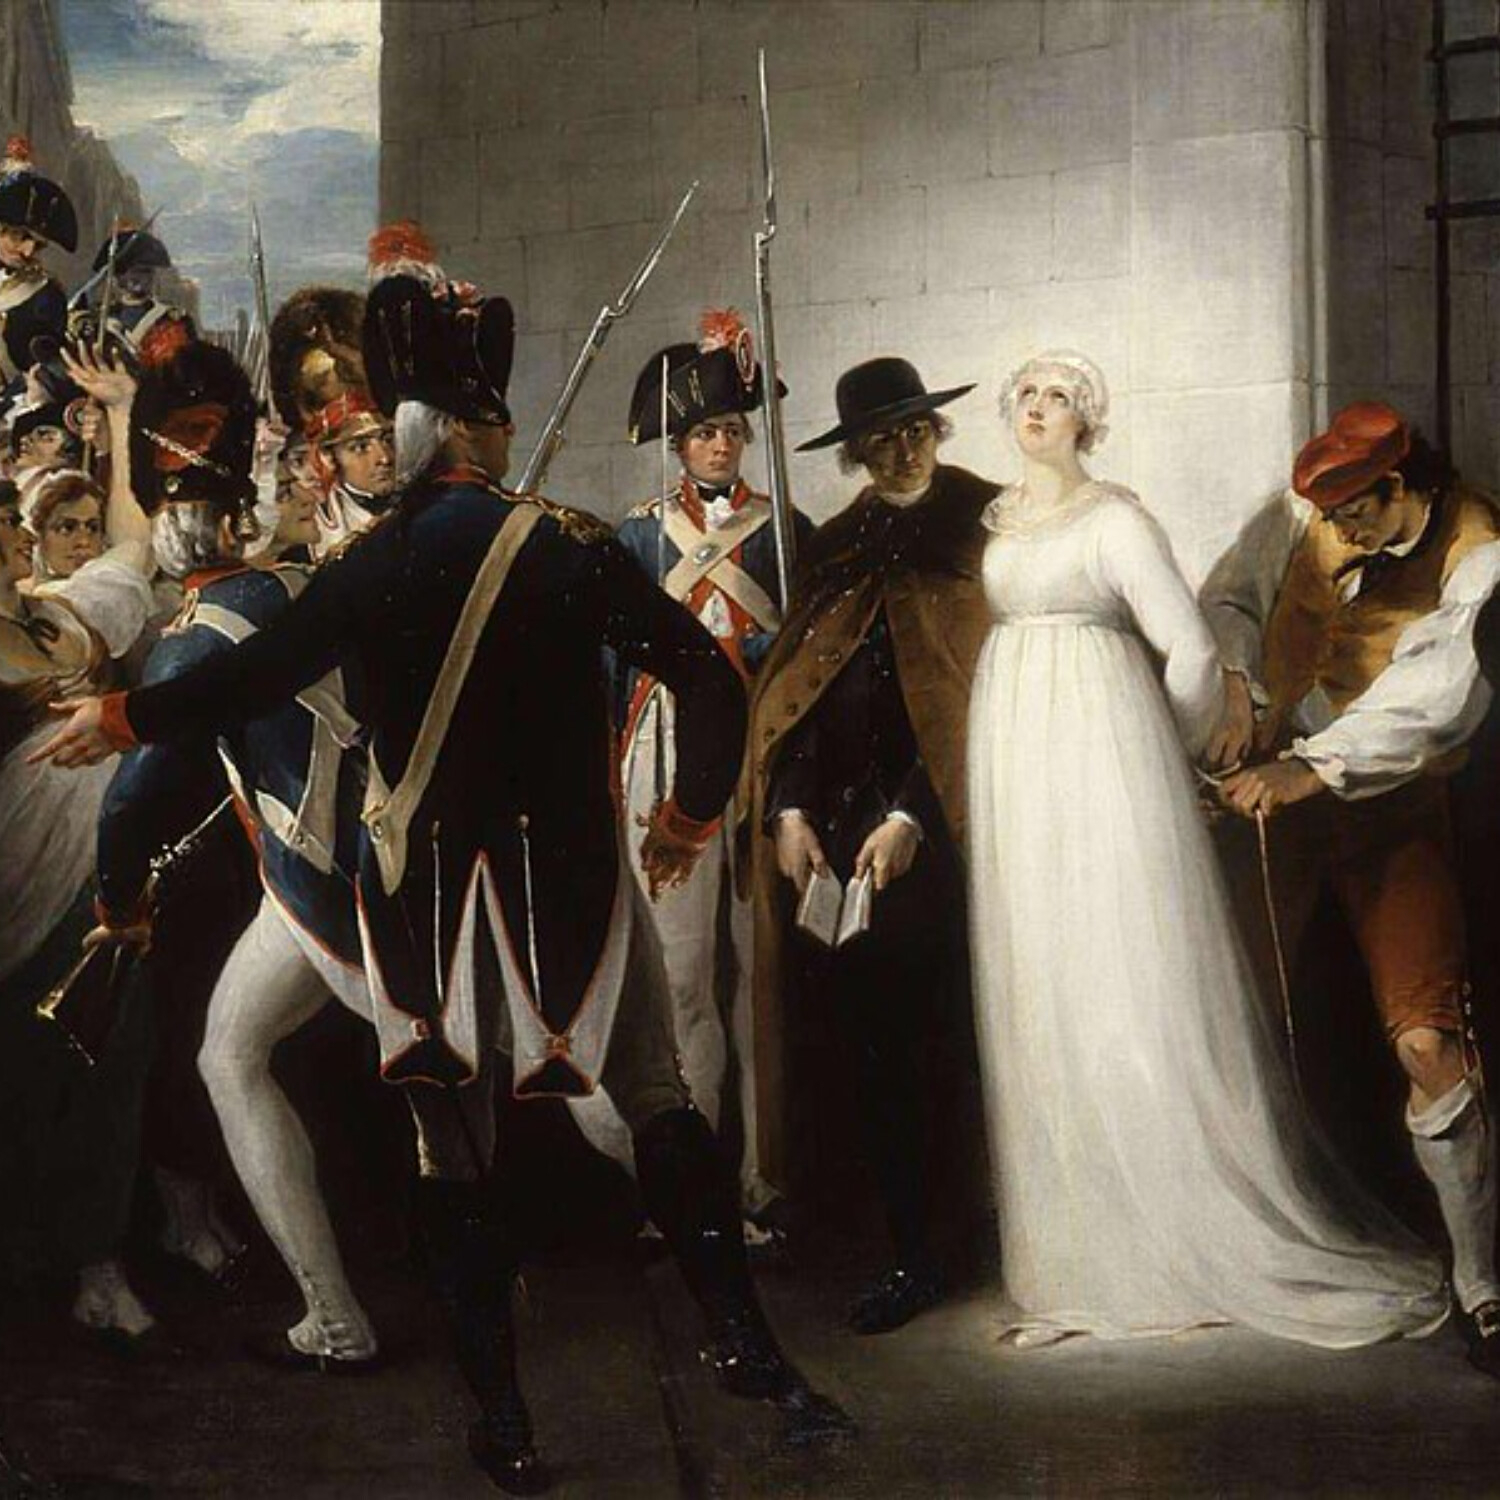 Trial and Execution of Marie Antoinette